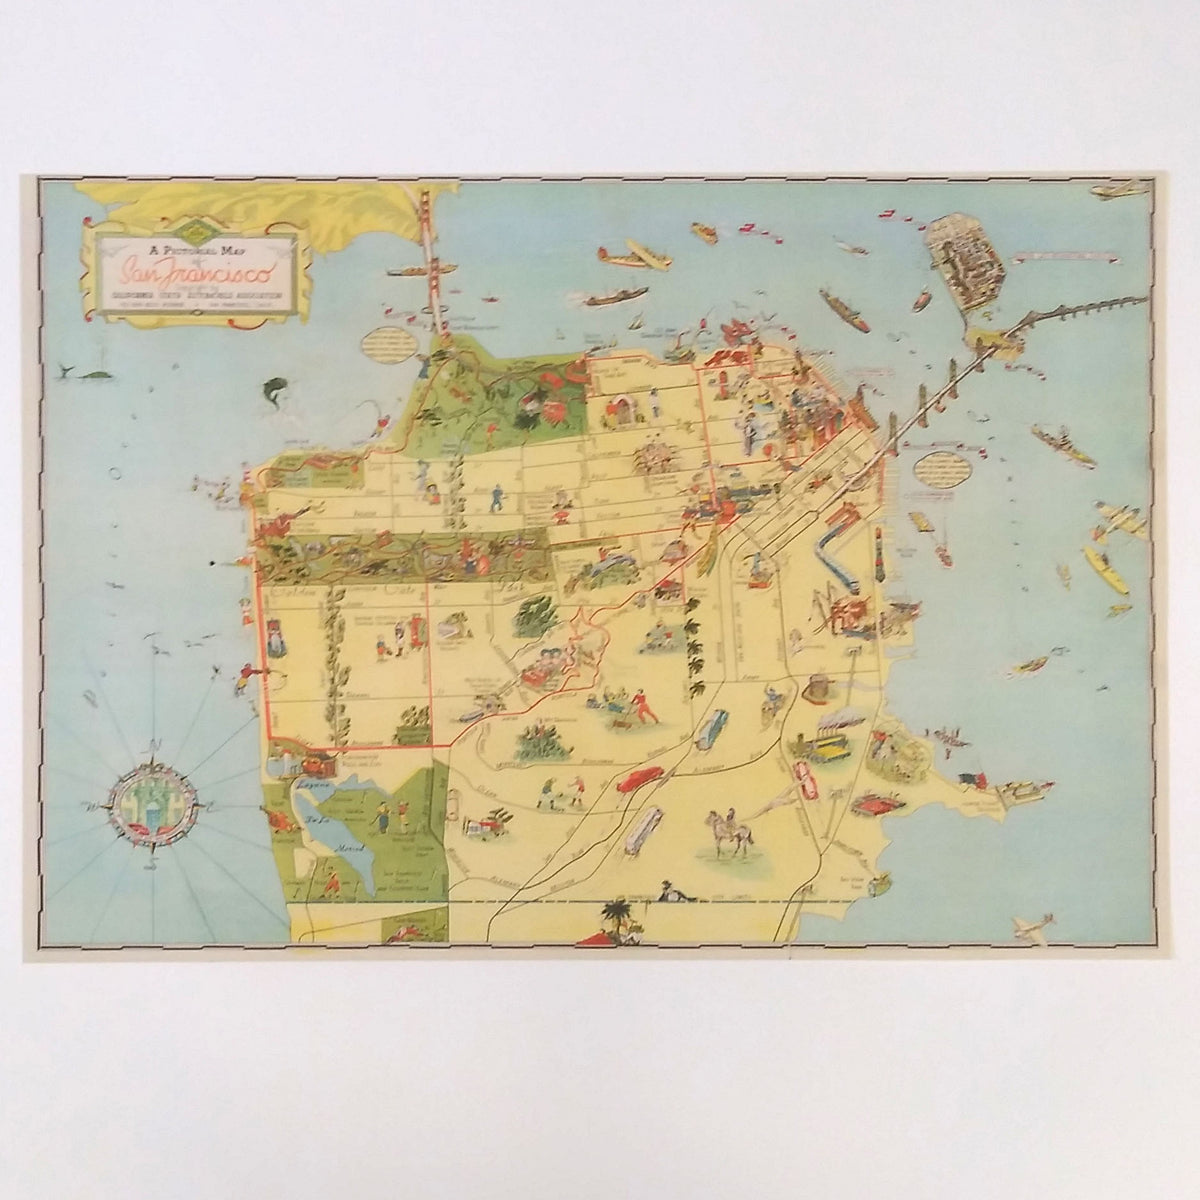 San Francisco Illustrated Map - Vintage Map Reproduction